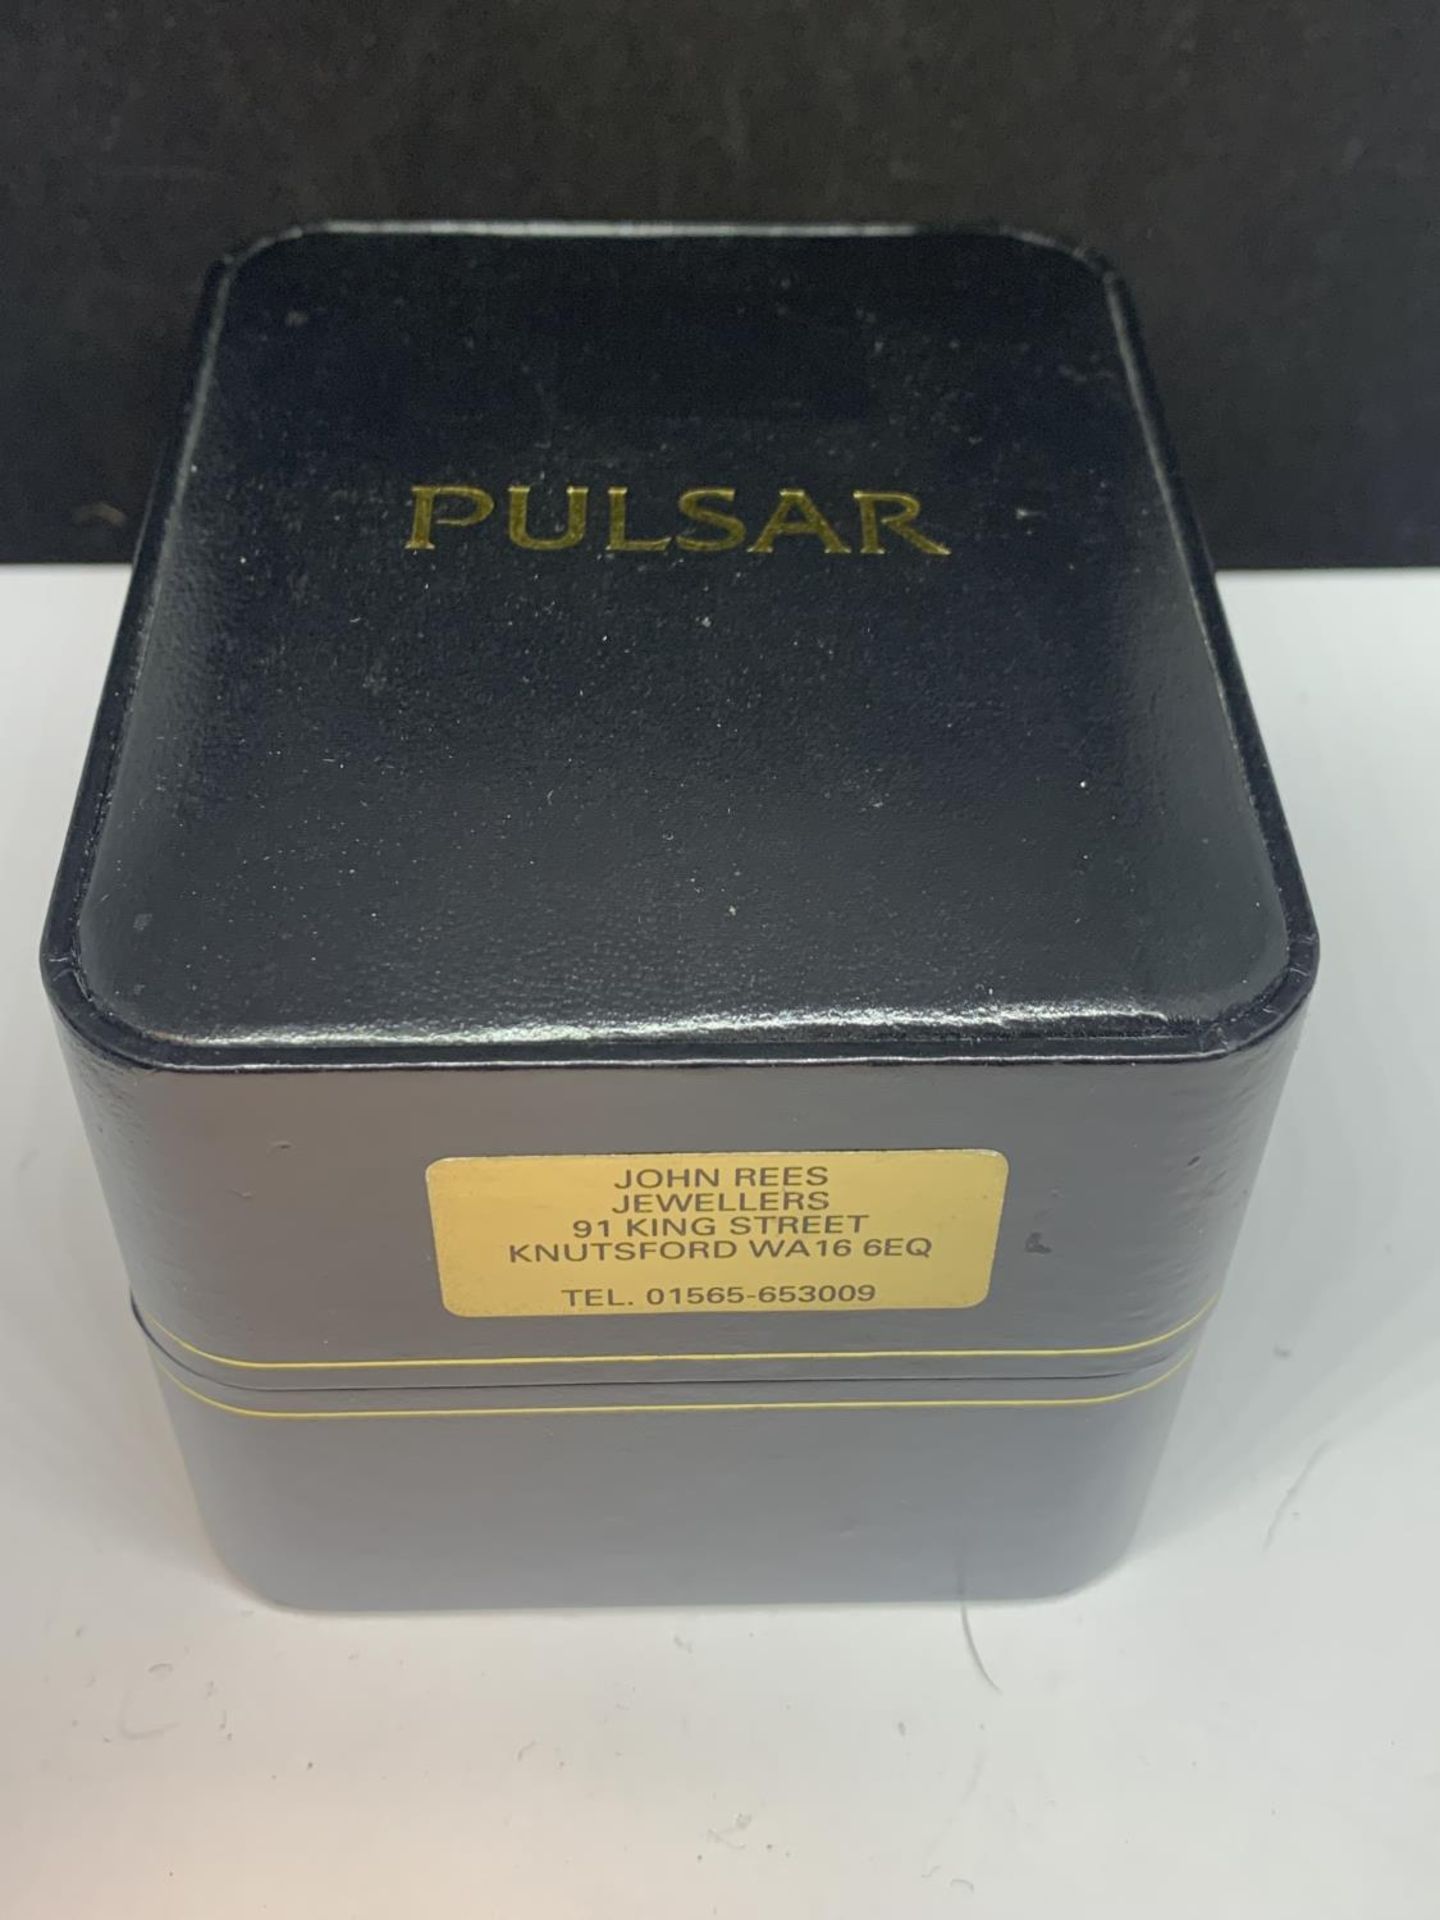 A PULSAR CALENDAR WRIST WATCH WITH LARGE SQUARE FACE AND BLACK LEATHER STRAP IN A PRESENTATION BOX - Bild 4 aus 4